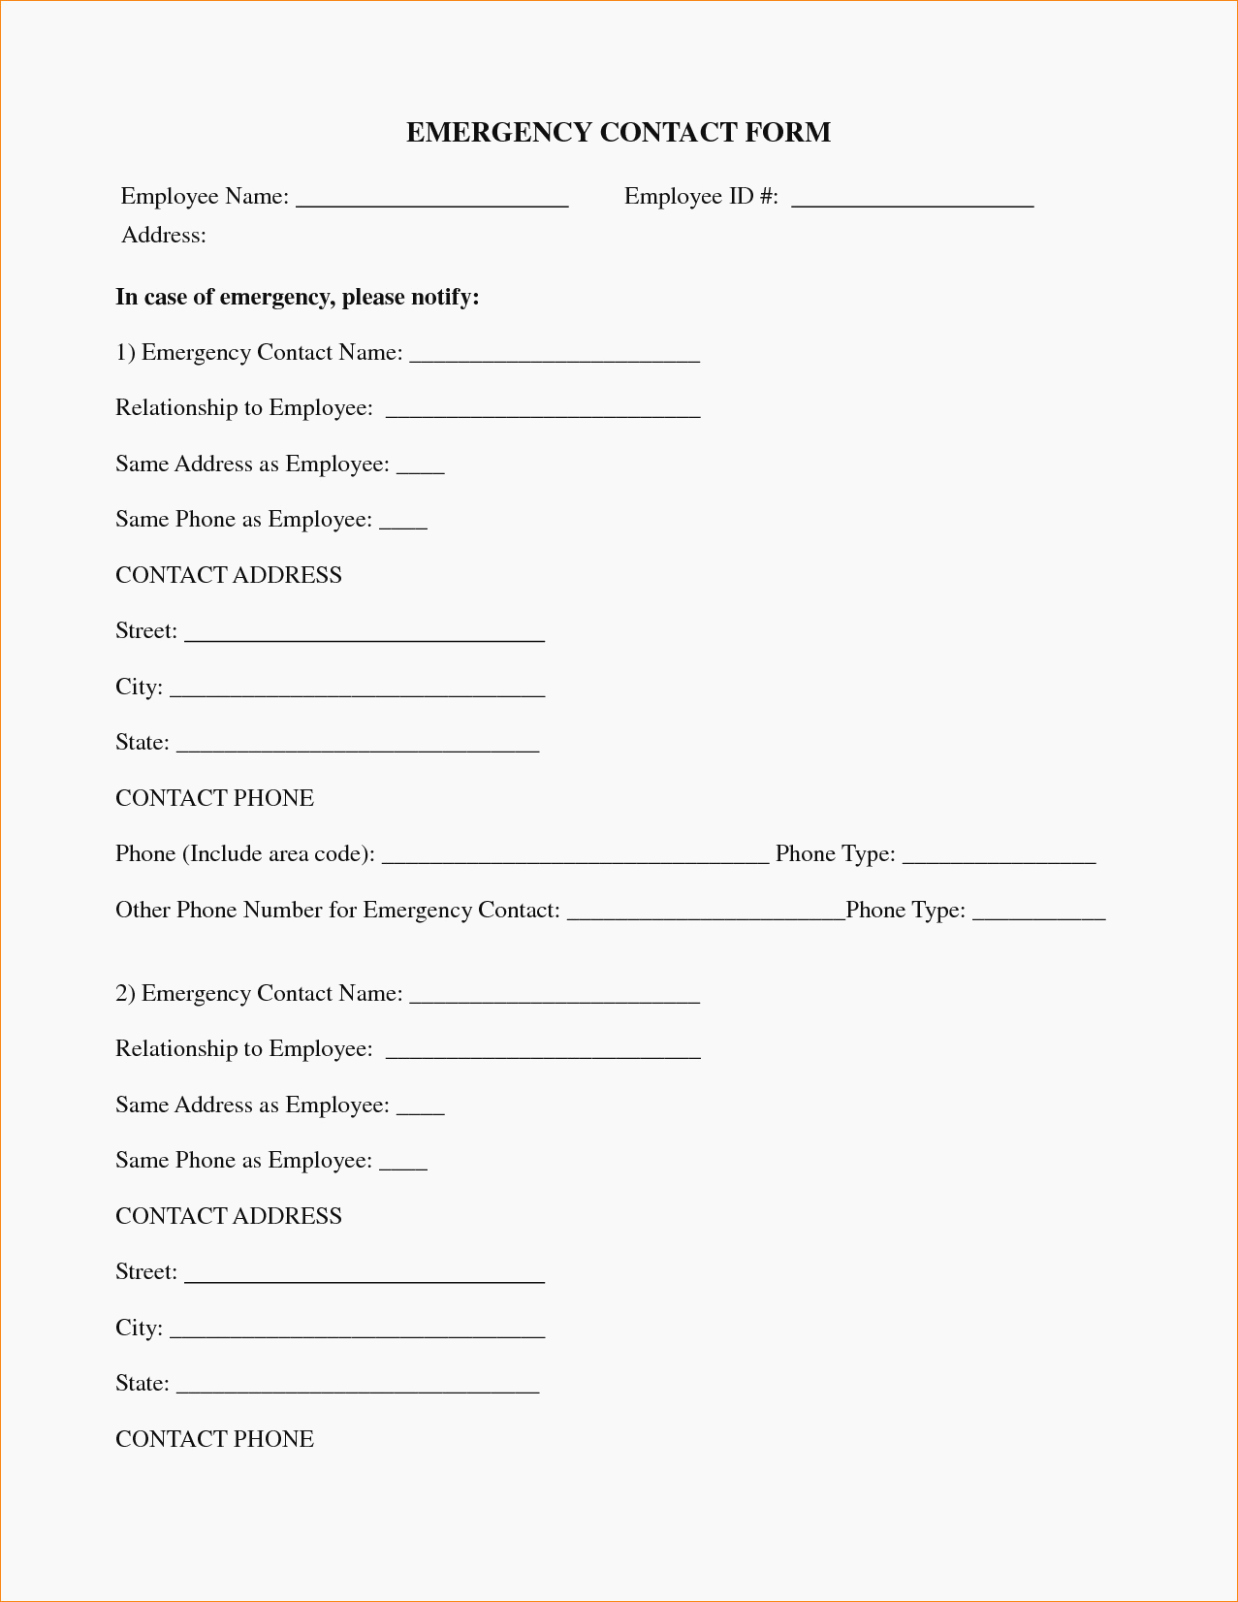 employee emergency contact forms beautiful 13 ugly truth about in case emergency of employee emergency contact forms